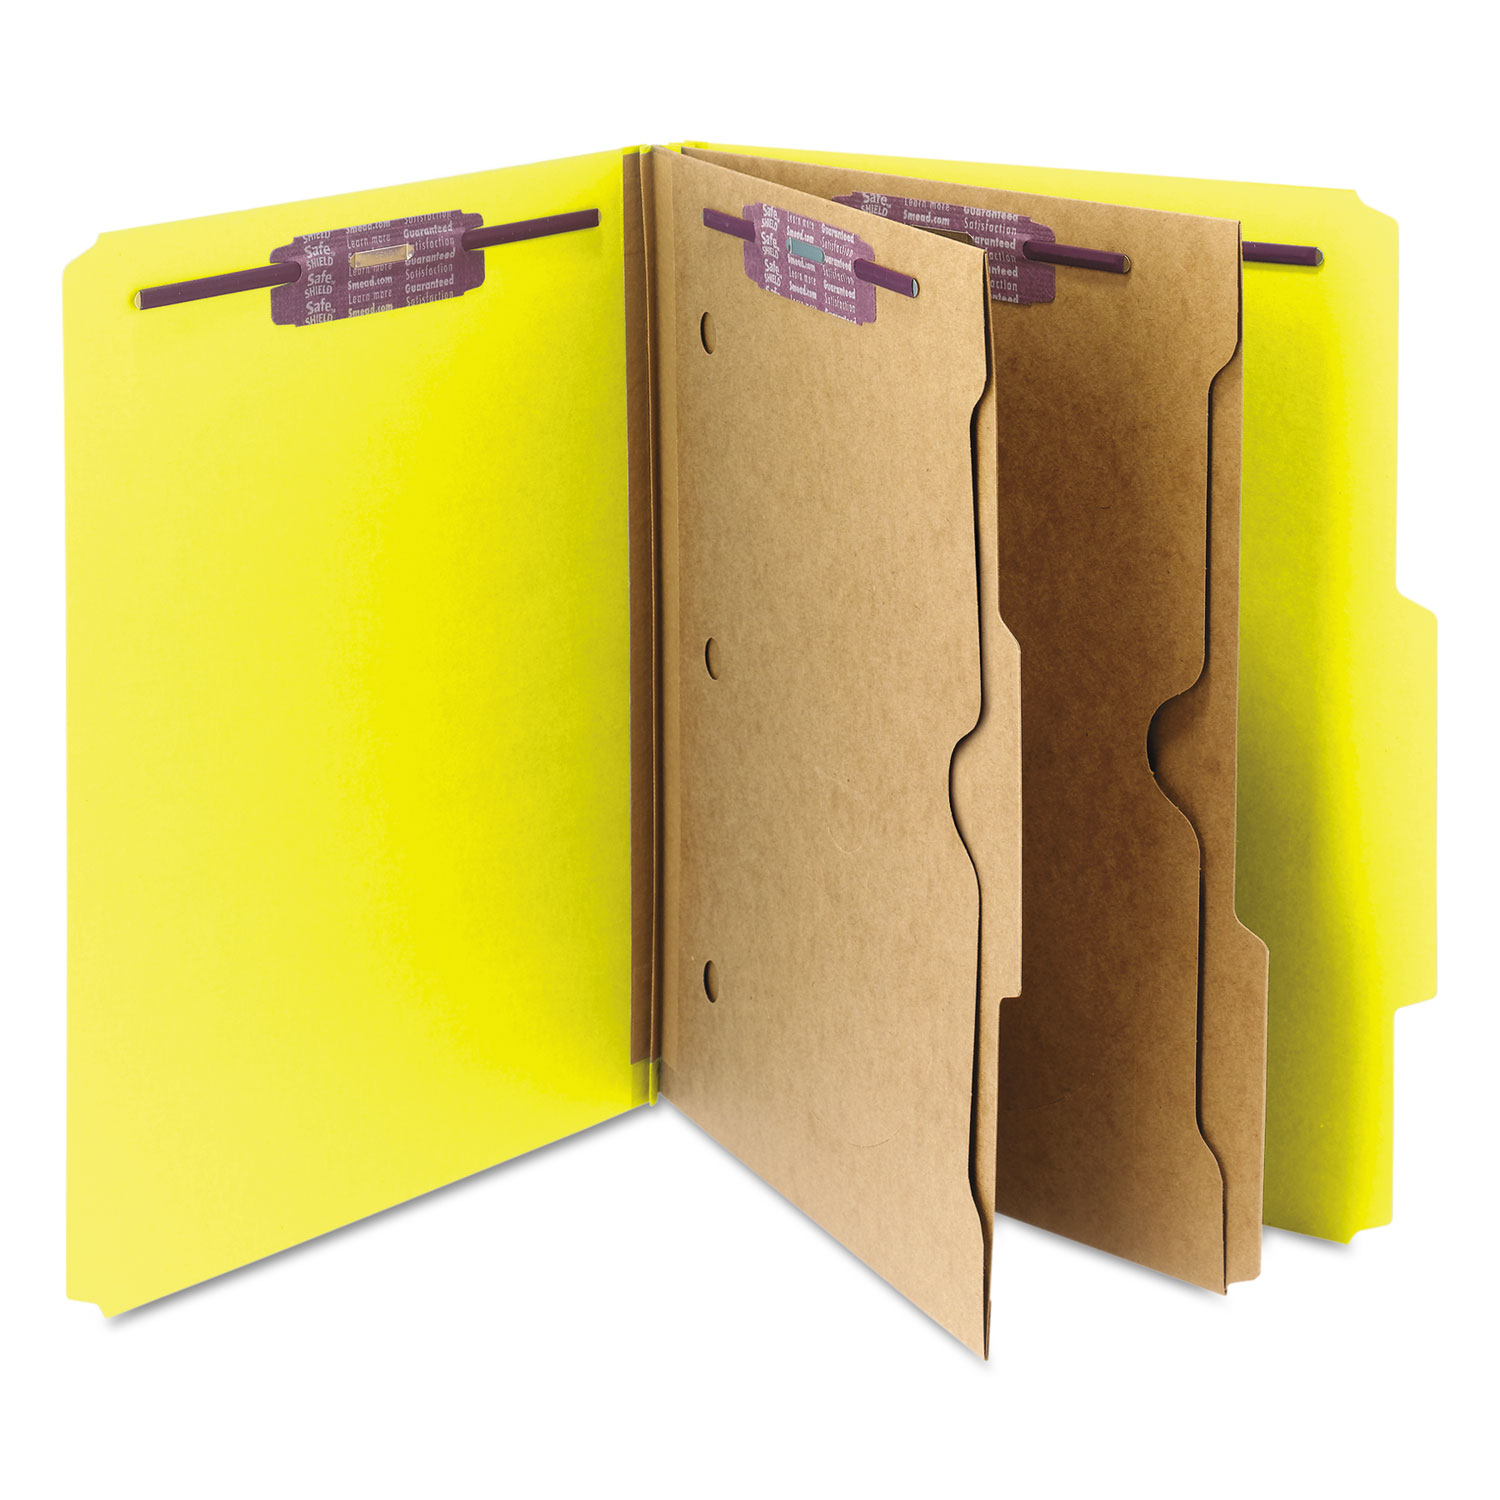 Smead 14084 Yellow Pressboard Classification Folders With Pocket-style Dividers 